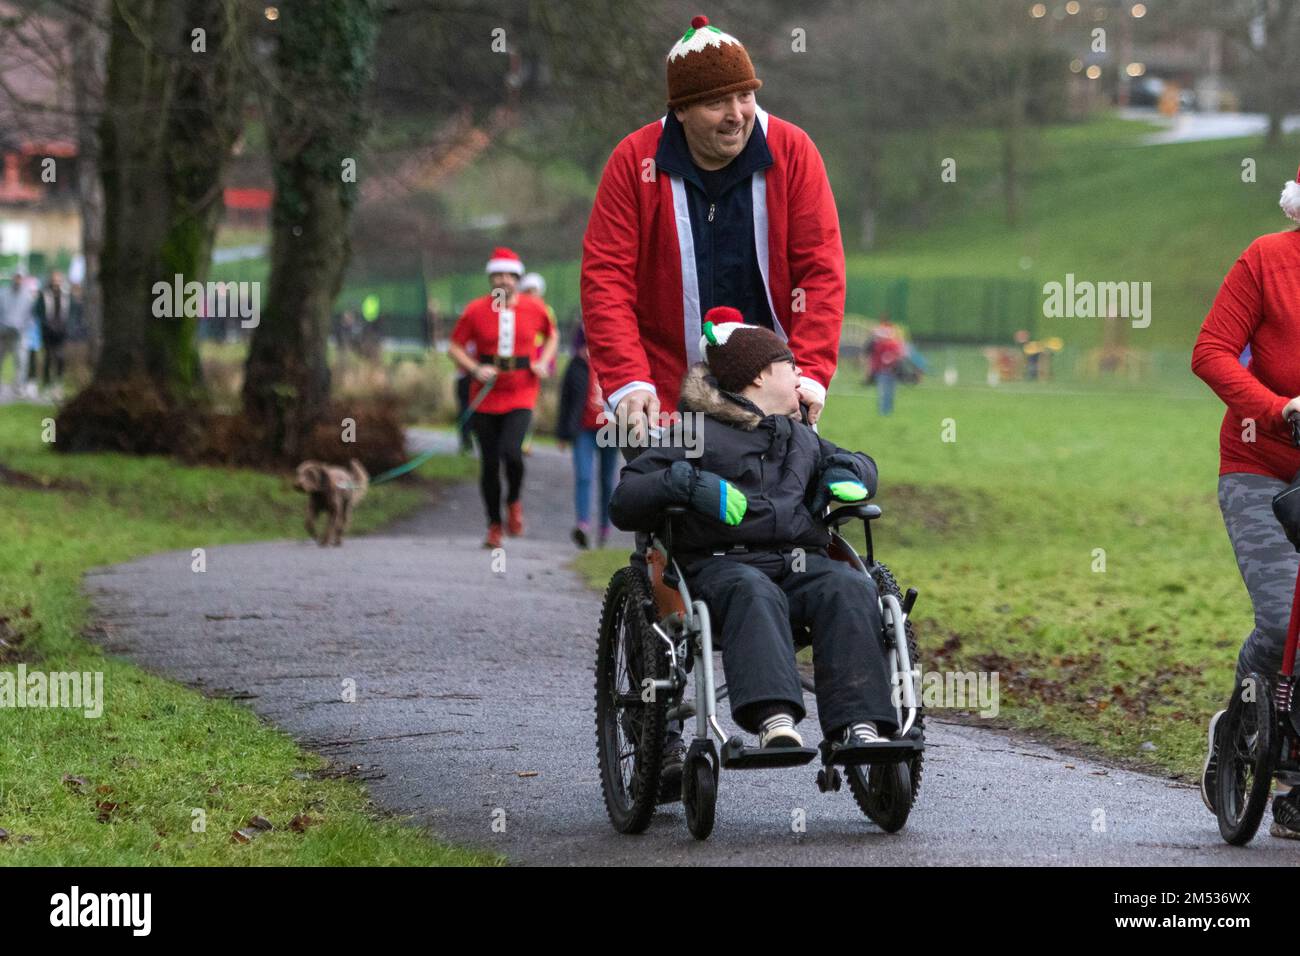 Chippenham, Wiltshire, UK. 25th December, 2022. People are pictured as they take part in an early morning Christmas day 5km park run in Monkton Park, Chippenham, Wiltshire. The wet weather did nothing to dampen the spirits of the 200-300 people who participated in the event with many of them dressing up in fancy dress. Credit: Lynchpics/Alamy Live News Stock Photo